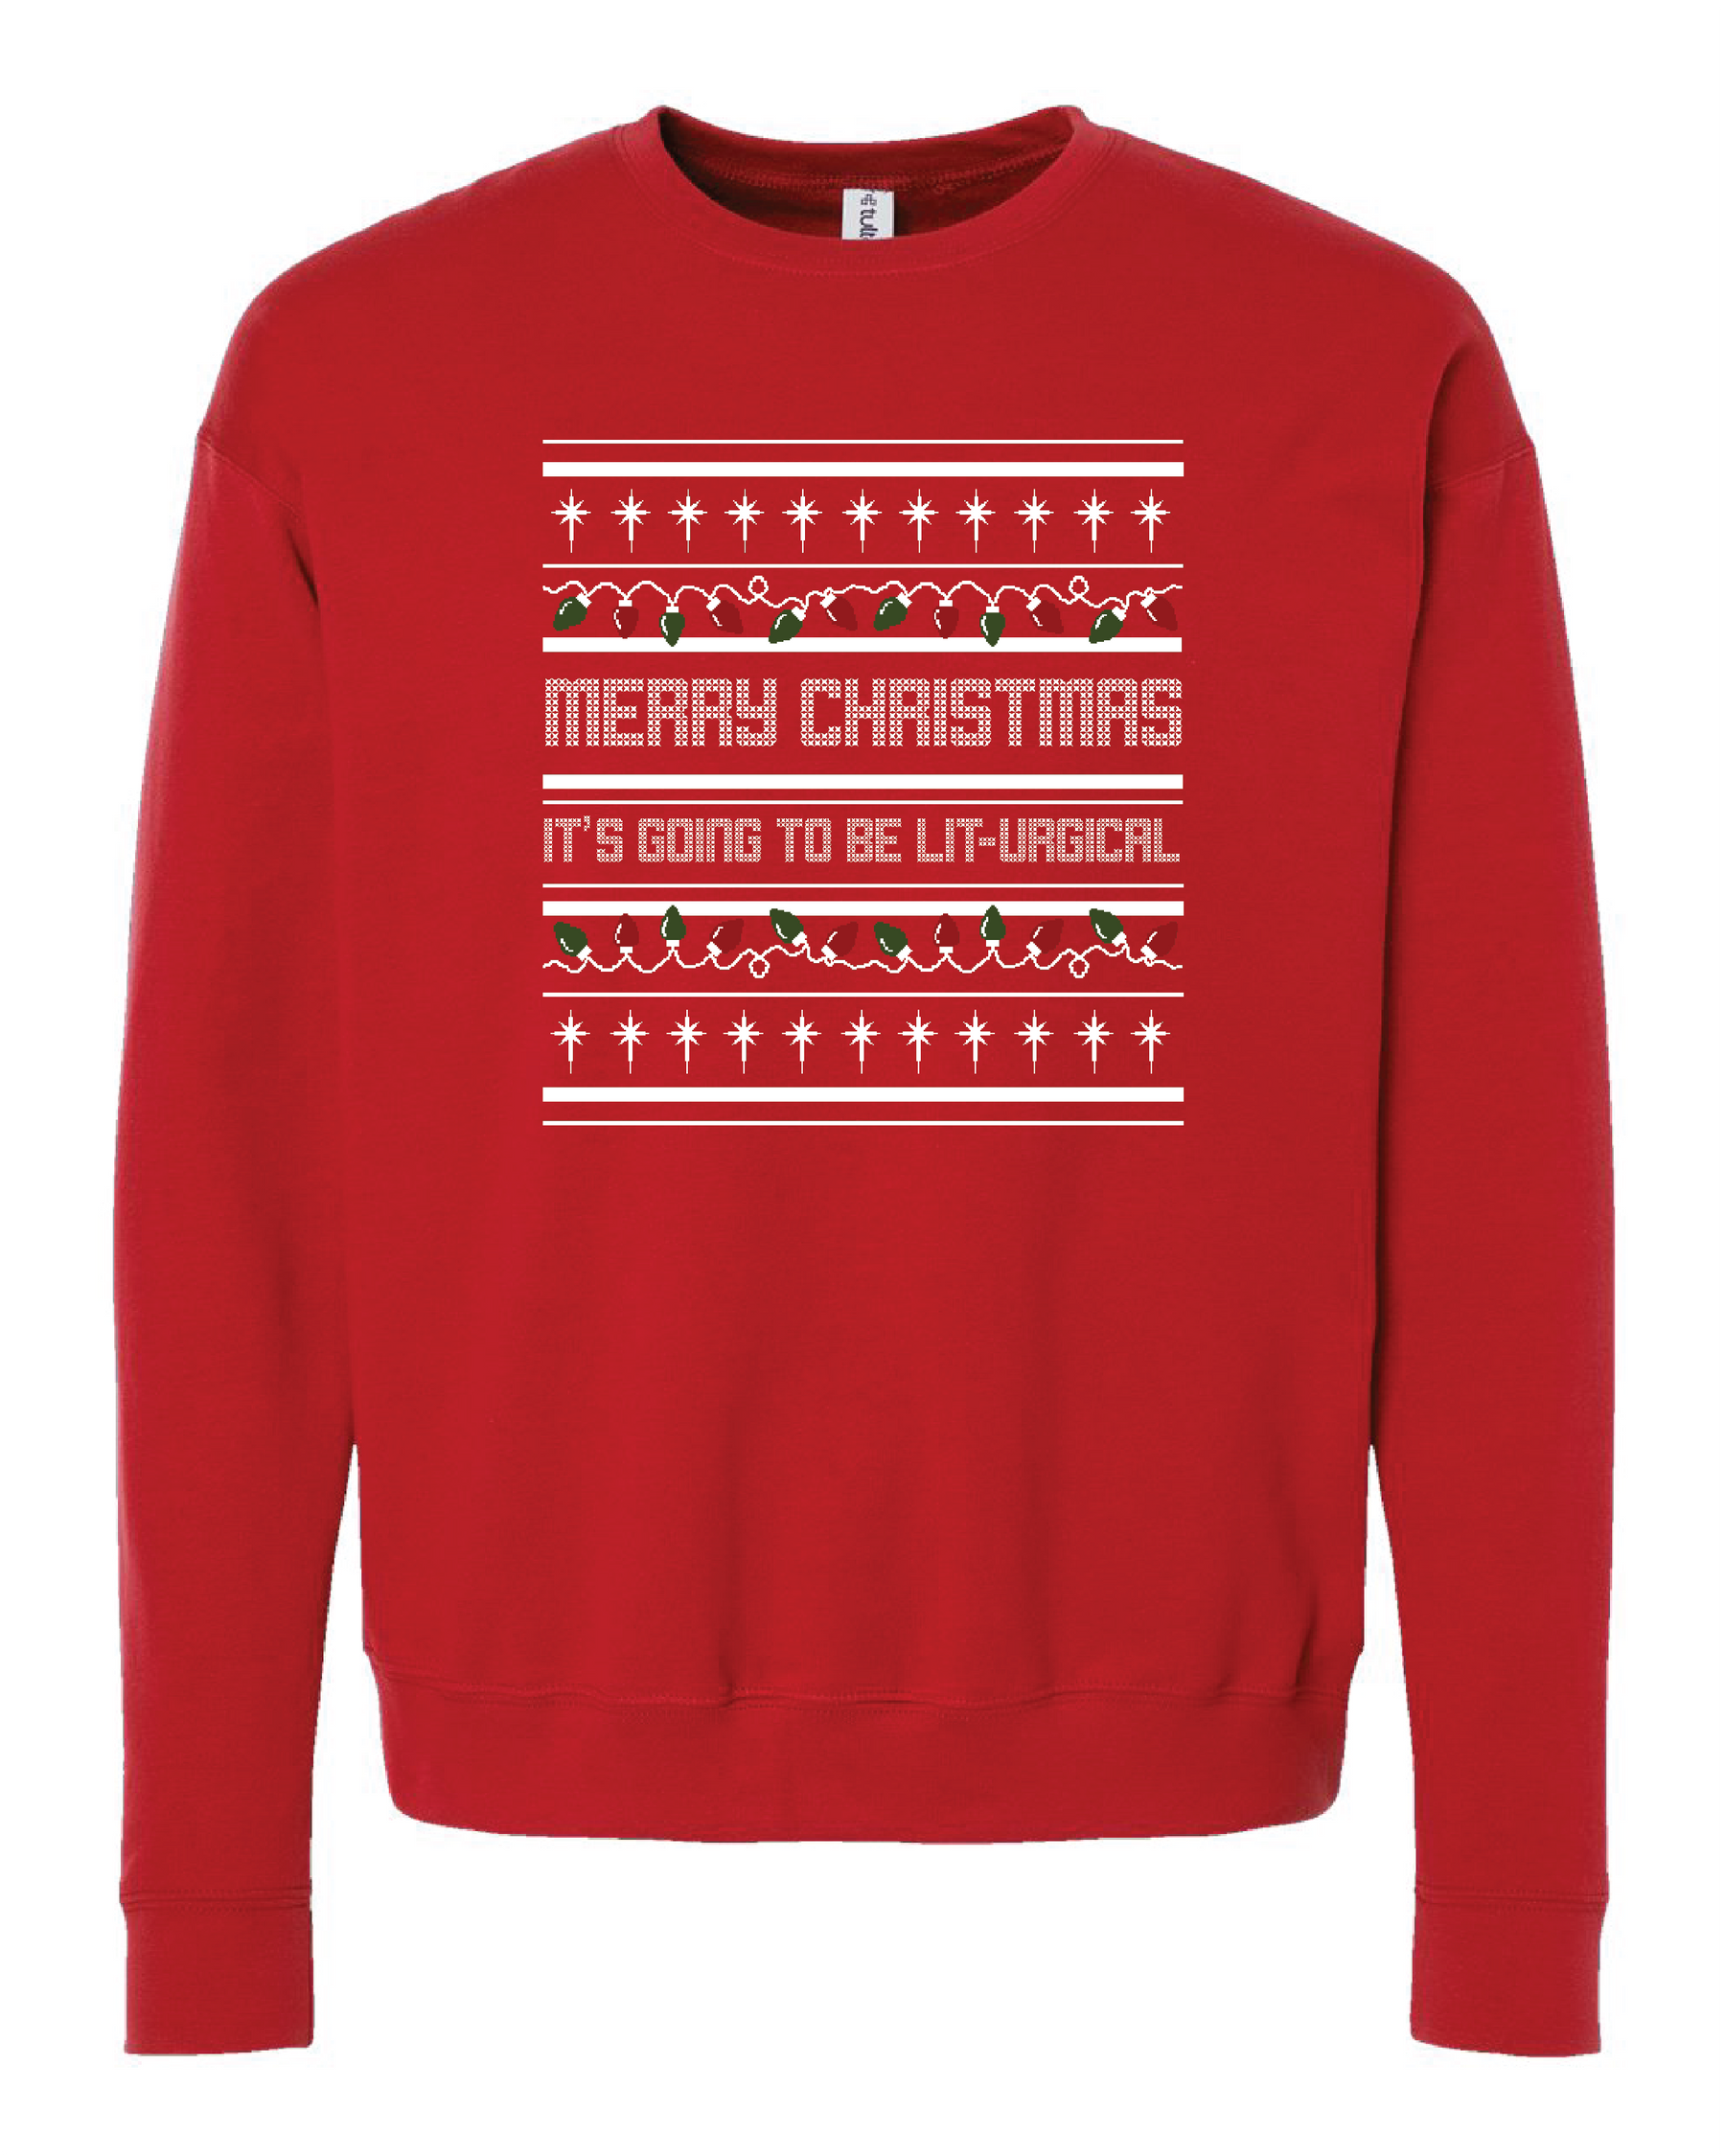 It's Going to be Lit-urgical! - Christmas  Sweatshirt (Crew Neck)